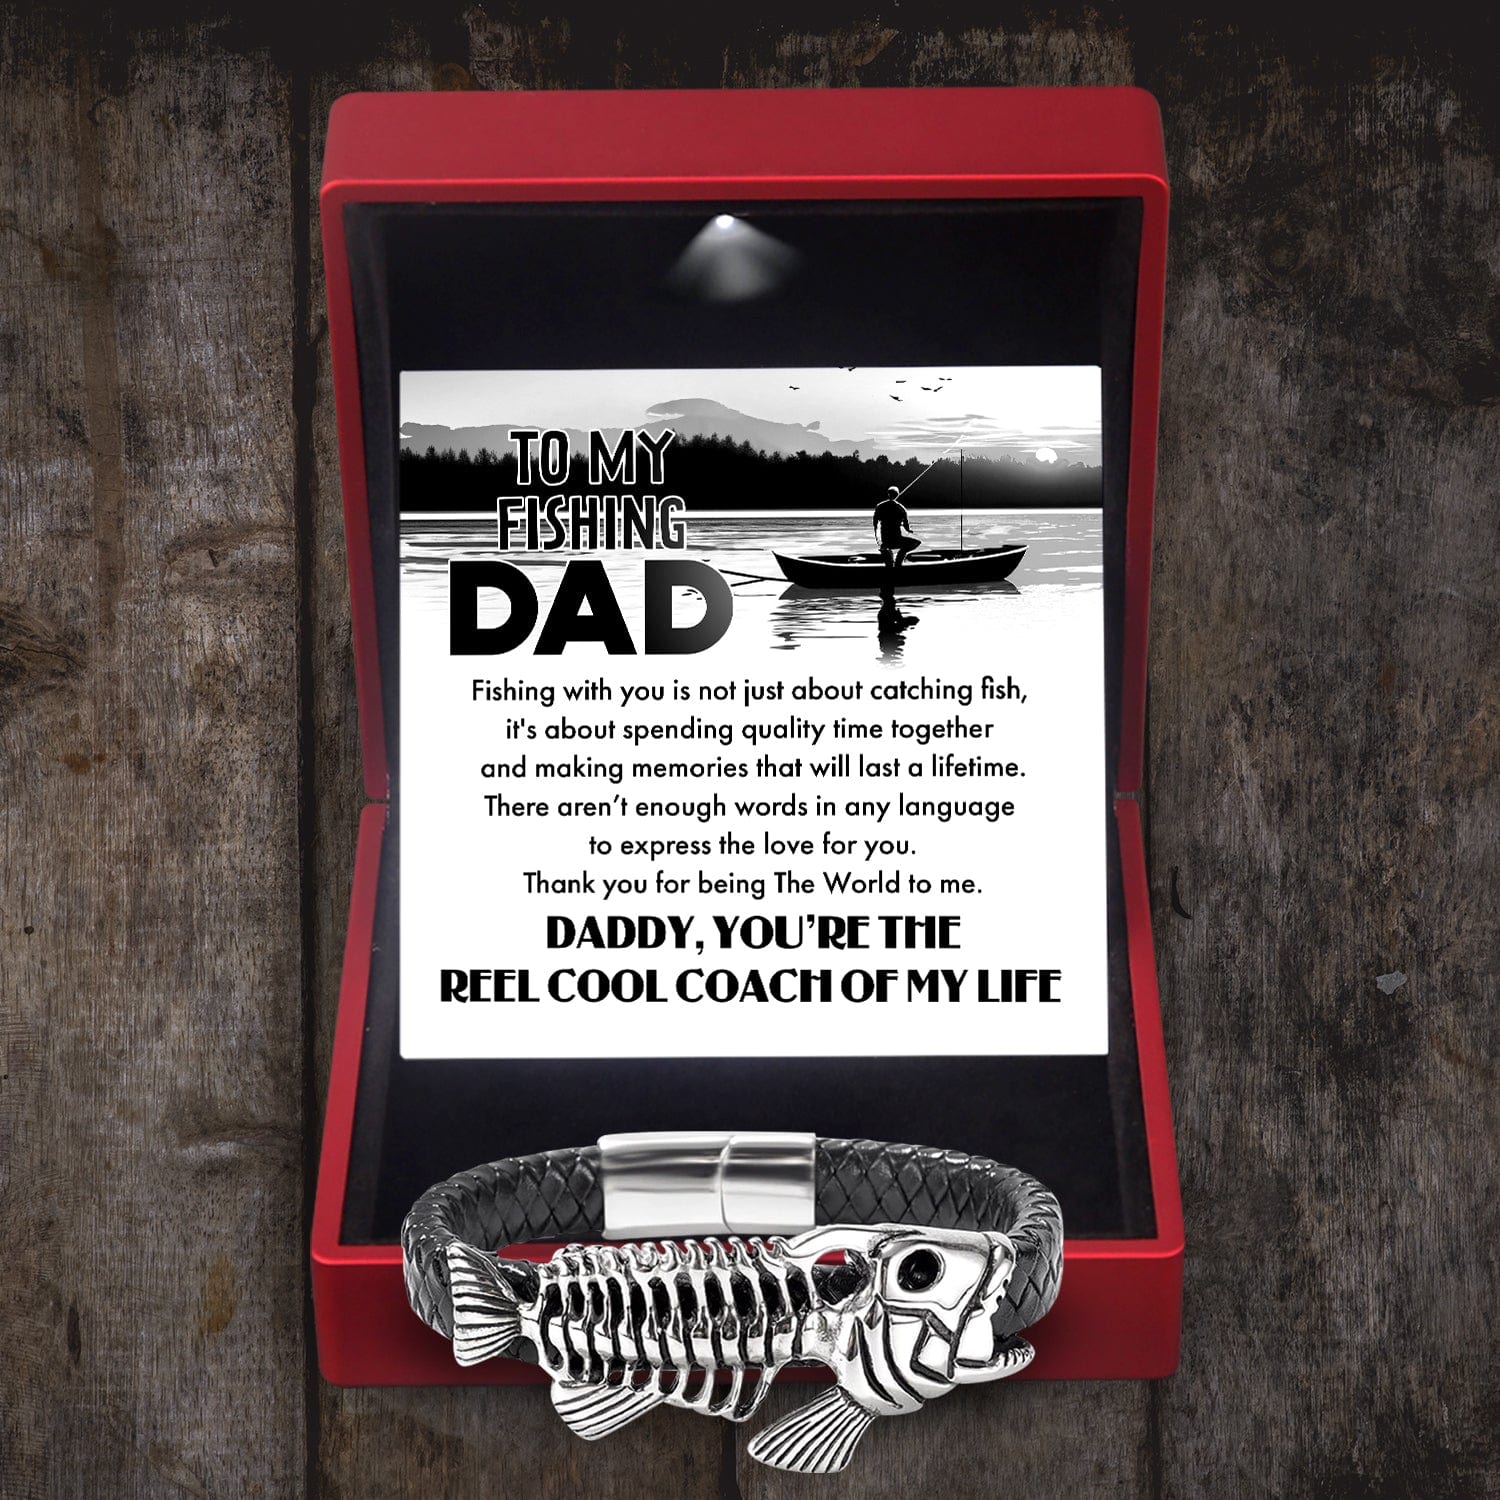 Black Leather Bracelet Fish Bone - Fishing - to My Dad - You’re The Reel Cool Coach of My Life - Gbzr18002 LED Light Box +$15